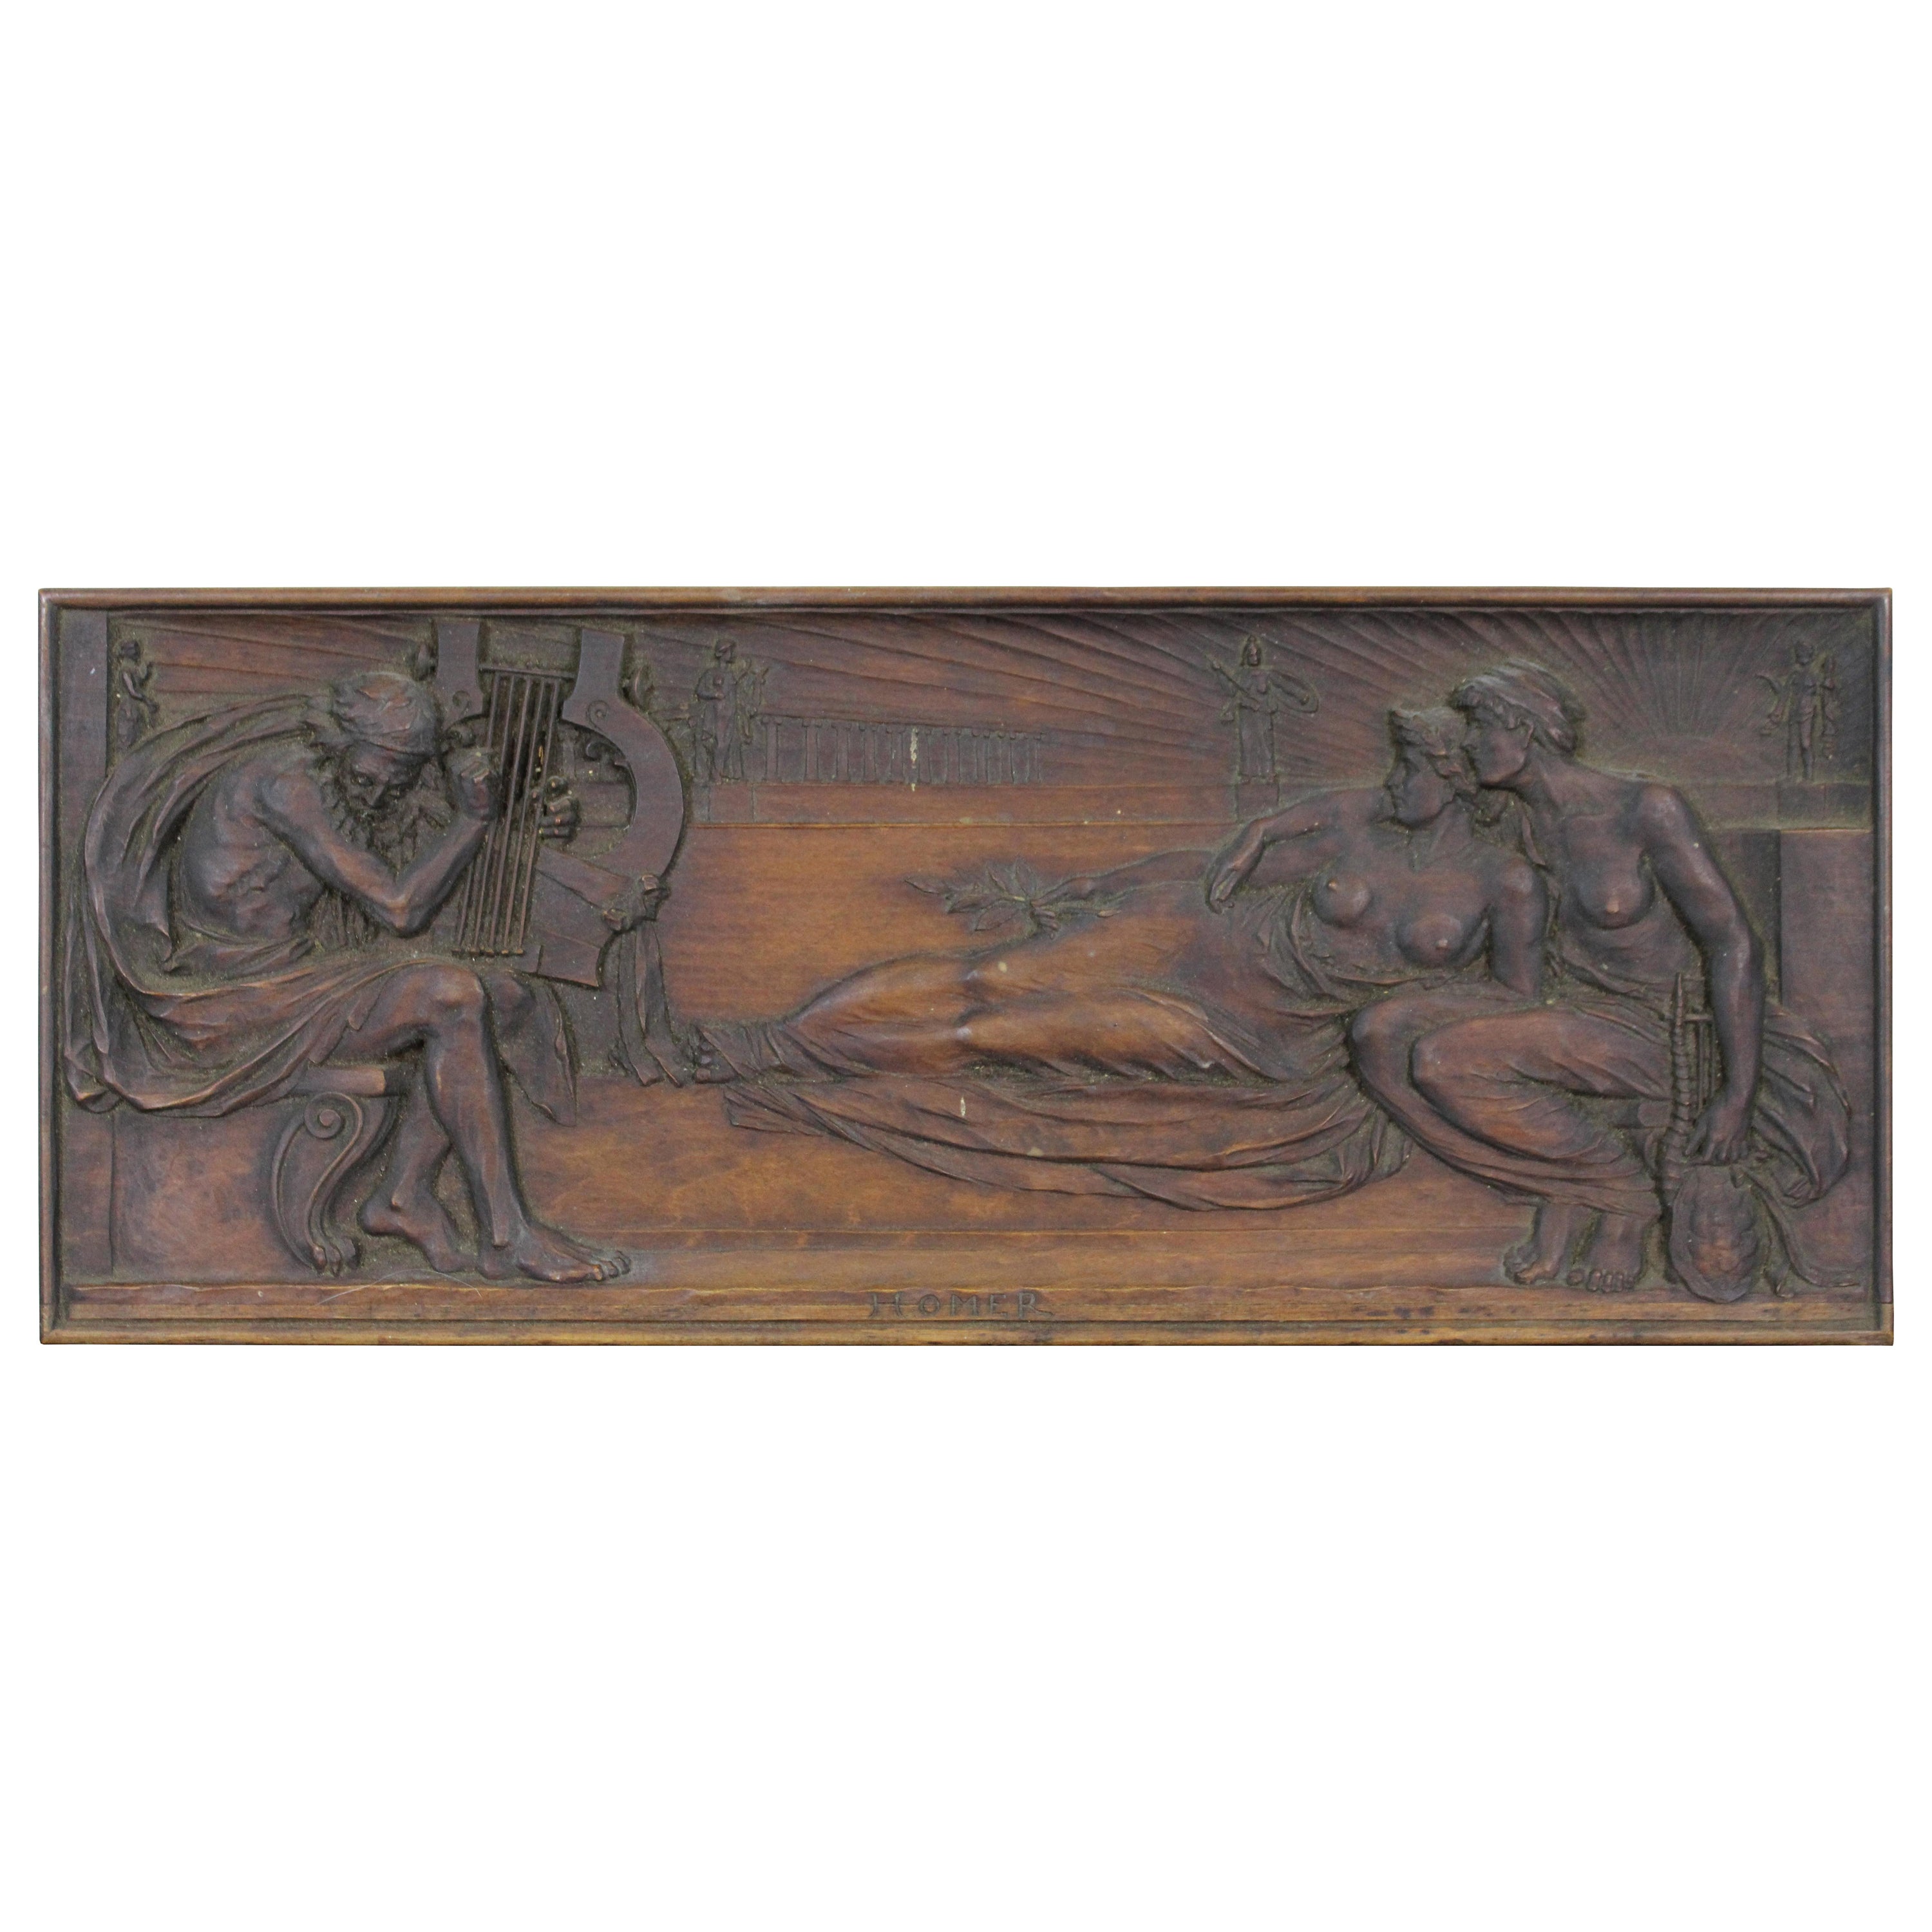 Rare Antique Neoclassical Carved Wood Bas Low Relief Homer Harry Bates Plaque For Sale